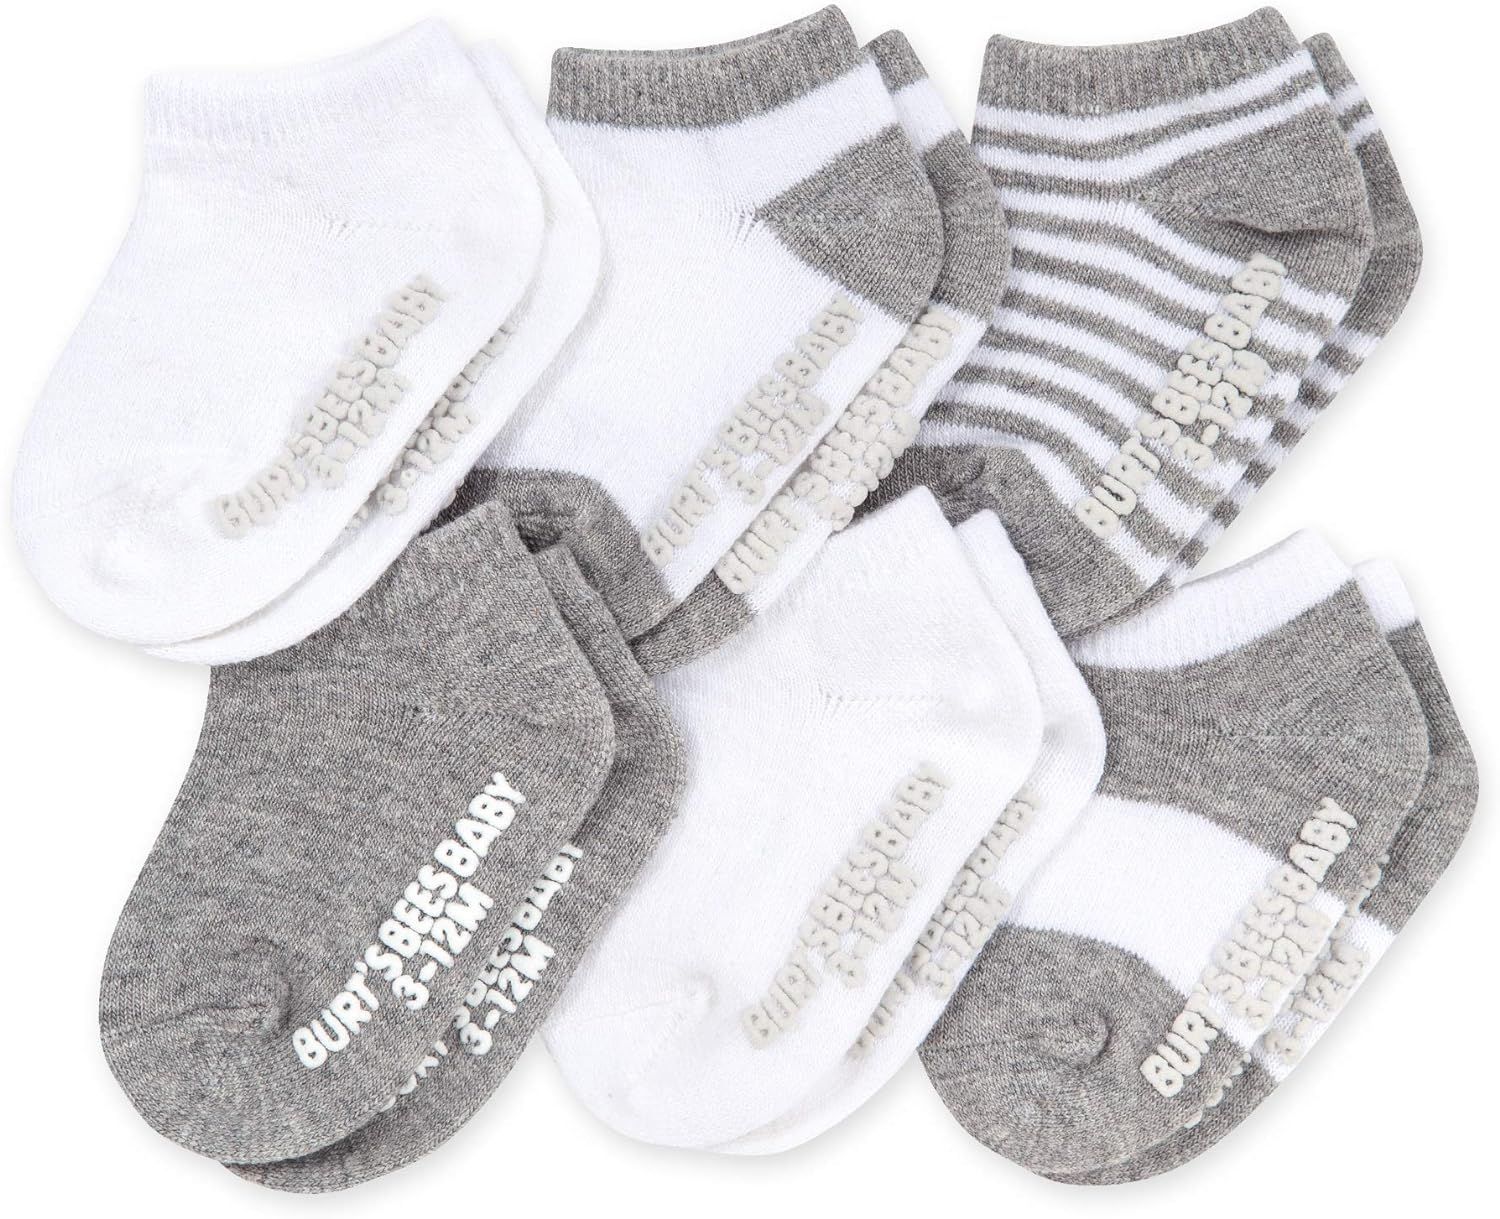 Burt's Bees Baby unisex-baby Socks, 6-pack Ankle Or Crew With Non-slip Grips, Made With Organic C... | Amazon (US)